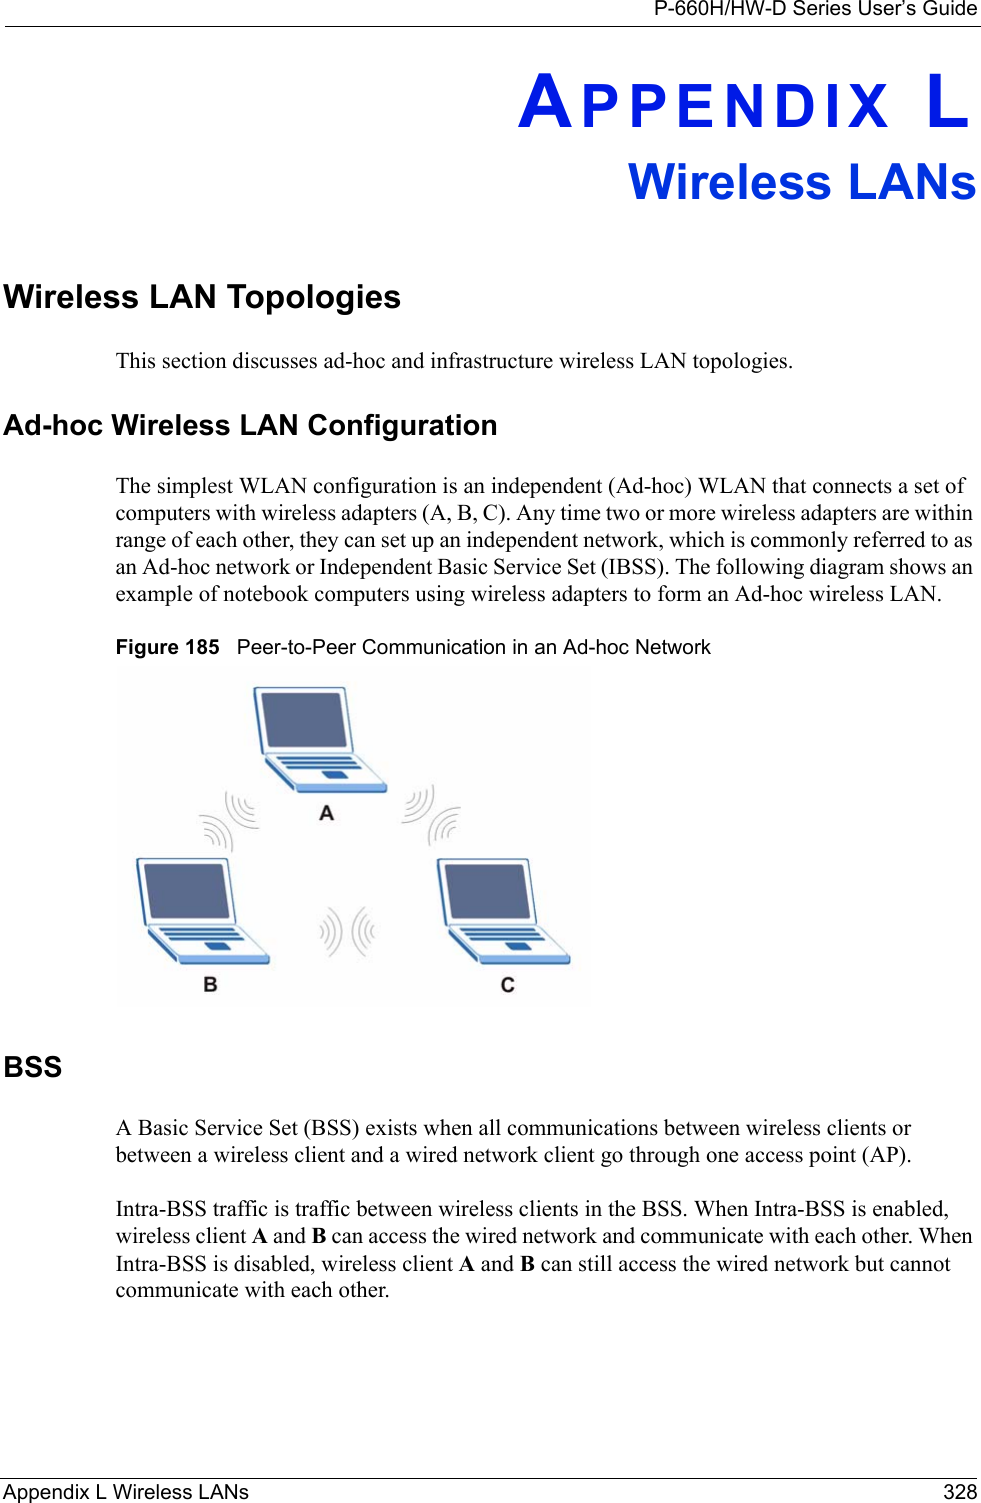 P-660H/HW-D Series User’s GuideAppendix L Wireless LANs 328APPENDIX LWireless LANsWireless LAN TopologiesThis section discusses ad-hoc and infrastructure wireless LAN topologies.Ad-hoc Wireless LAN ConfigurationThe simplest WLAN configuration is an independent (Ad-hoc) WLAN that connects a set of computers with wireless adapters (A, B, C). Any time two or more wireless adapters are within range of each other, they can set up an independent network, which is commonly referred to as an Ad-hoc network or Independent Basic Service Set (IBSS). The following diagram shows an example of notebook computers using wireless adapters to form an Ad-hoc wireless LAN. Figure 185   Peer-to-Peer Communication in an Ad-hoc NetworkBSSA Basic Service Set (BSS) exists when all communications between wireless clients or between a wireless client and a wired network client go through one access point (AP). Intra-BSS traffic is traffic between wireless clients in the BSS. When Intra-BSS is enabled, wireless client A and B can access the wired network and communicate with each other. When Intra-BSS is disabled, wireless client A and B can still access the wired network but cannot communicate with each other.